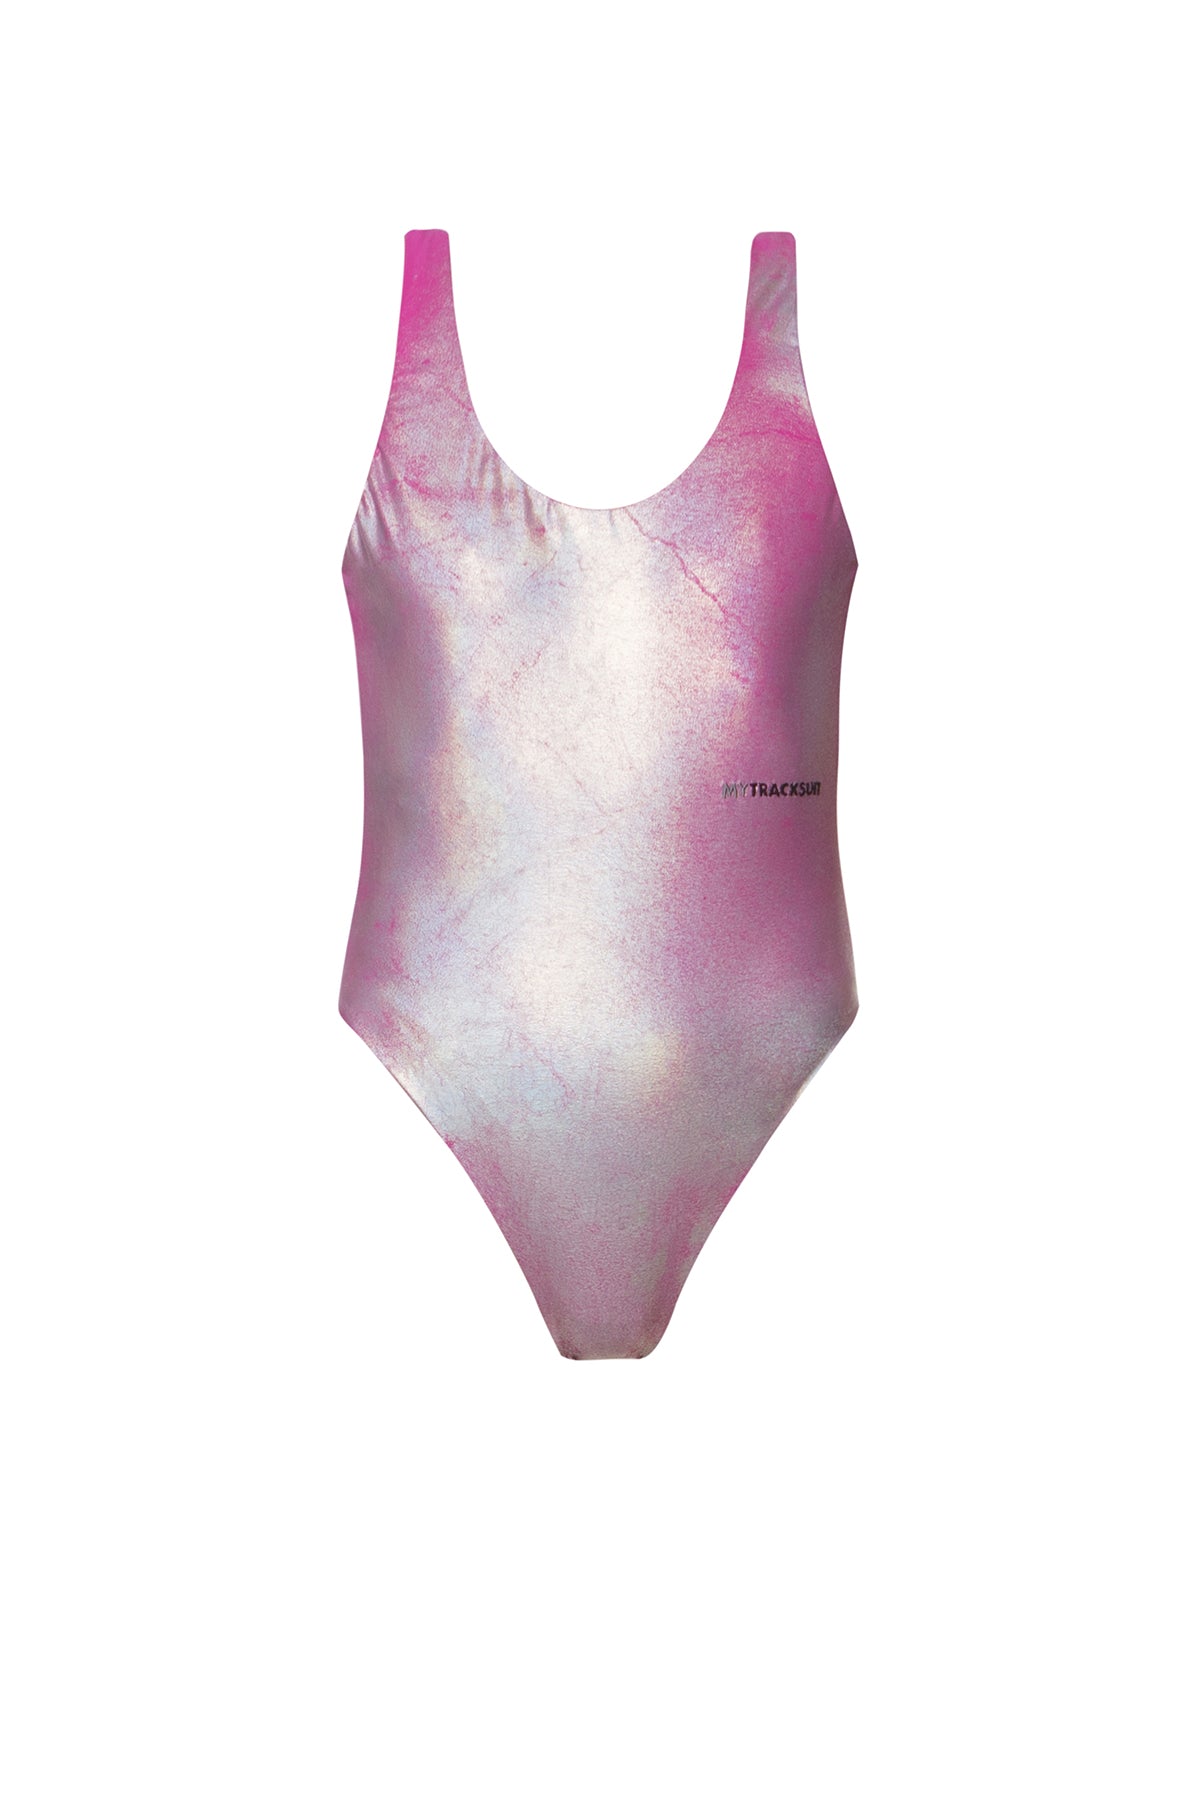 MIRROR EDITION SWIMSUIT PINK